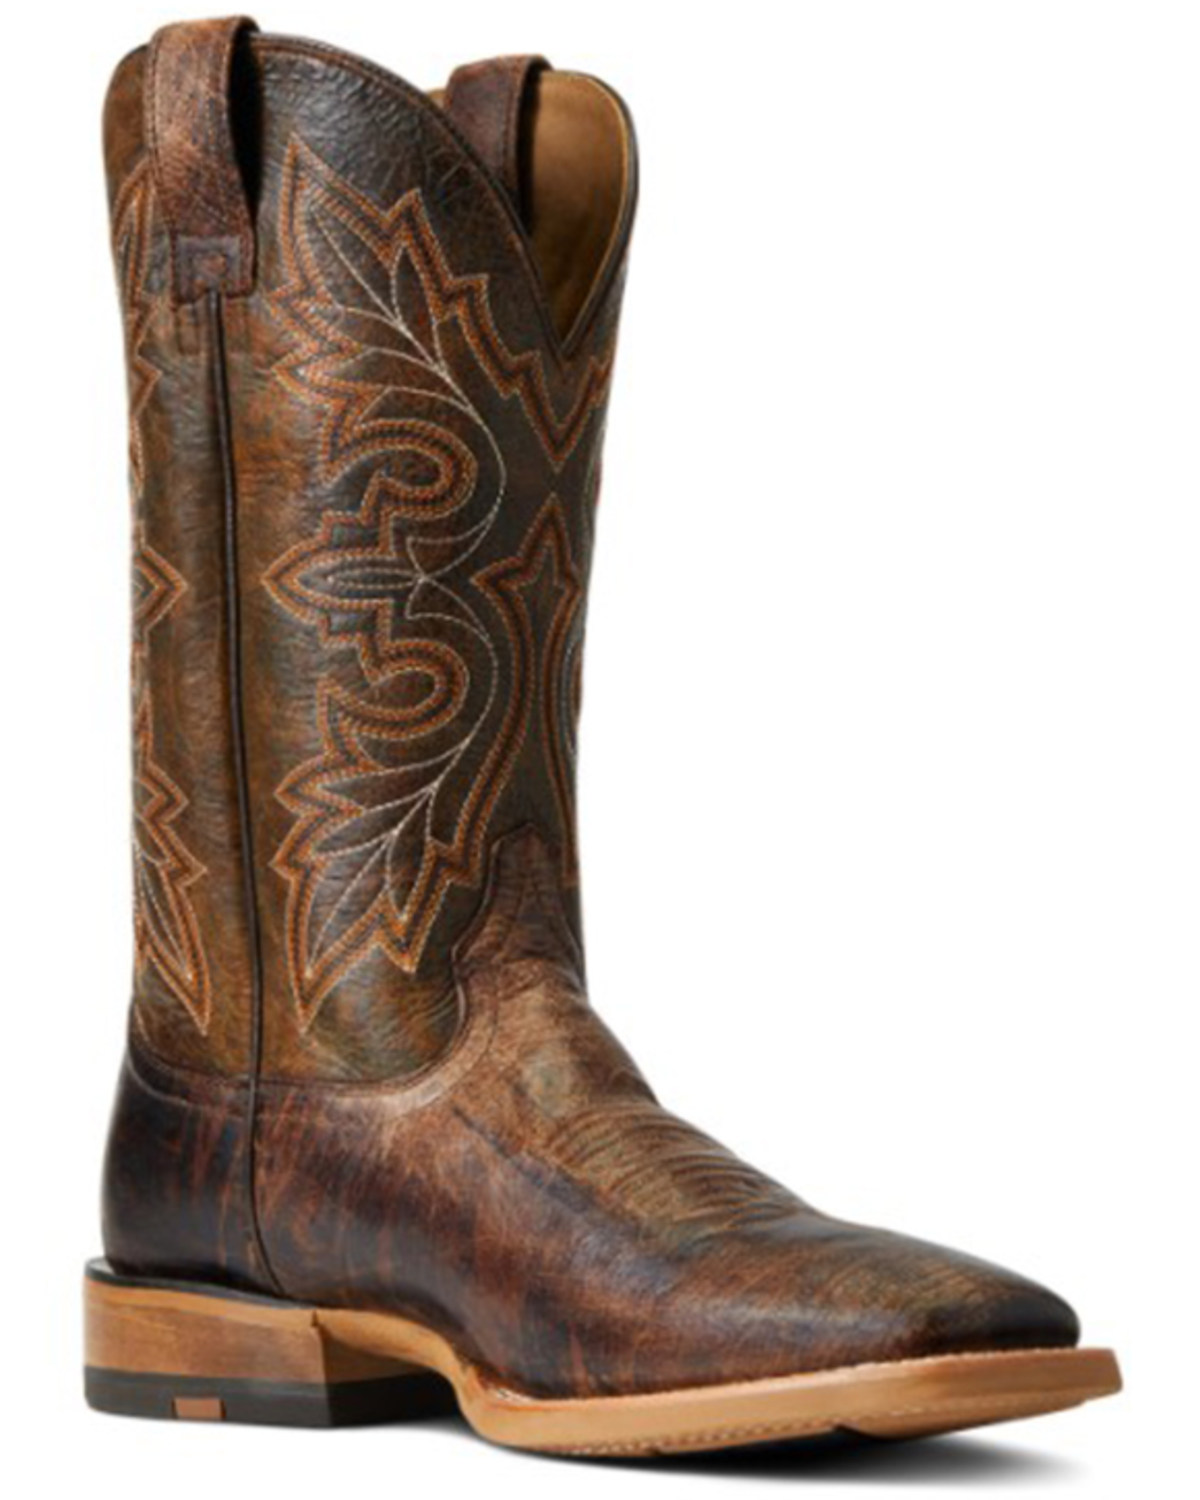 Ariat Men's Standout Leather Performance Western Boot - Broad Square Toe